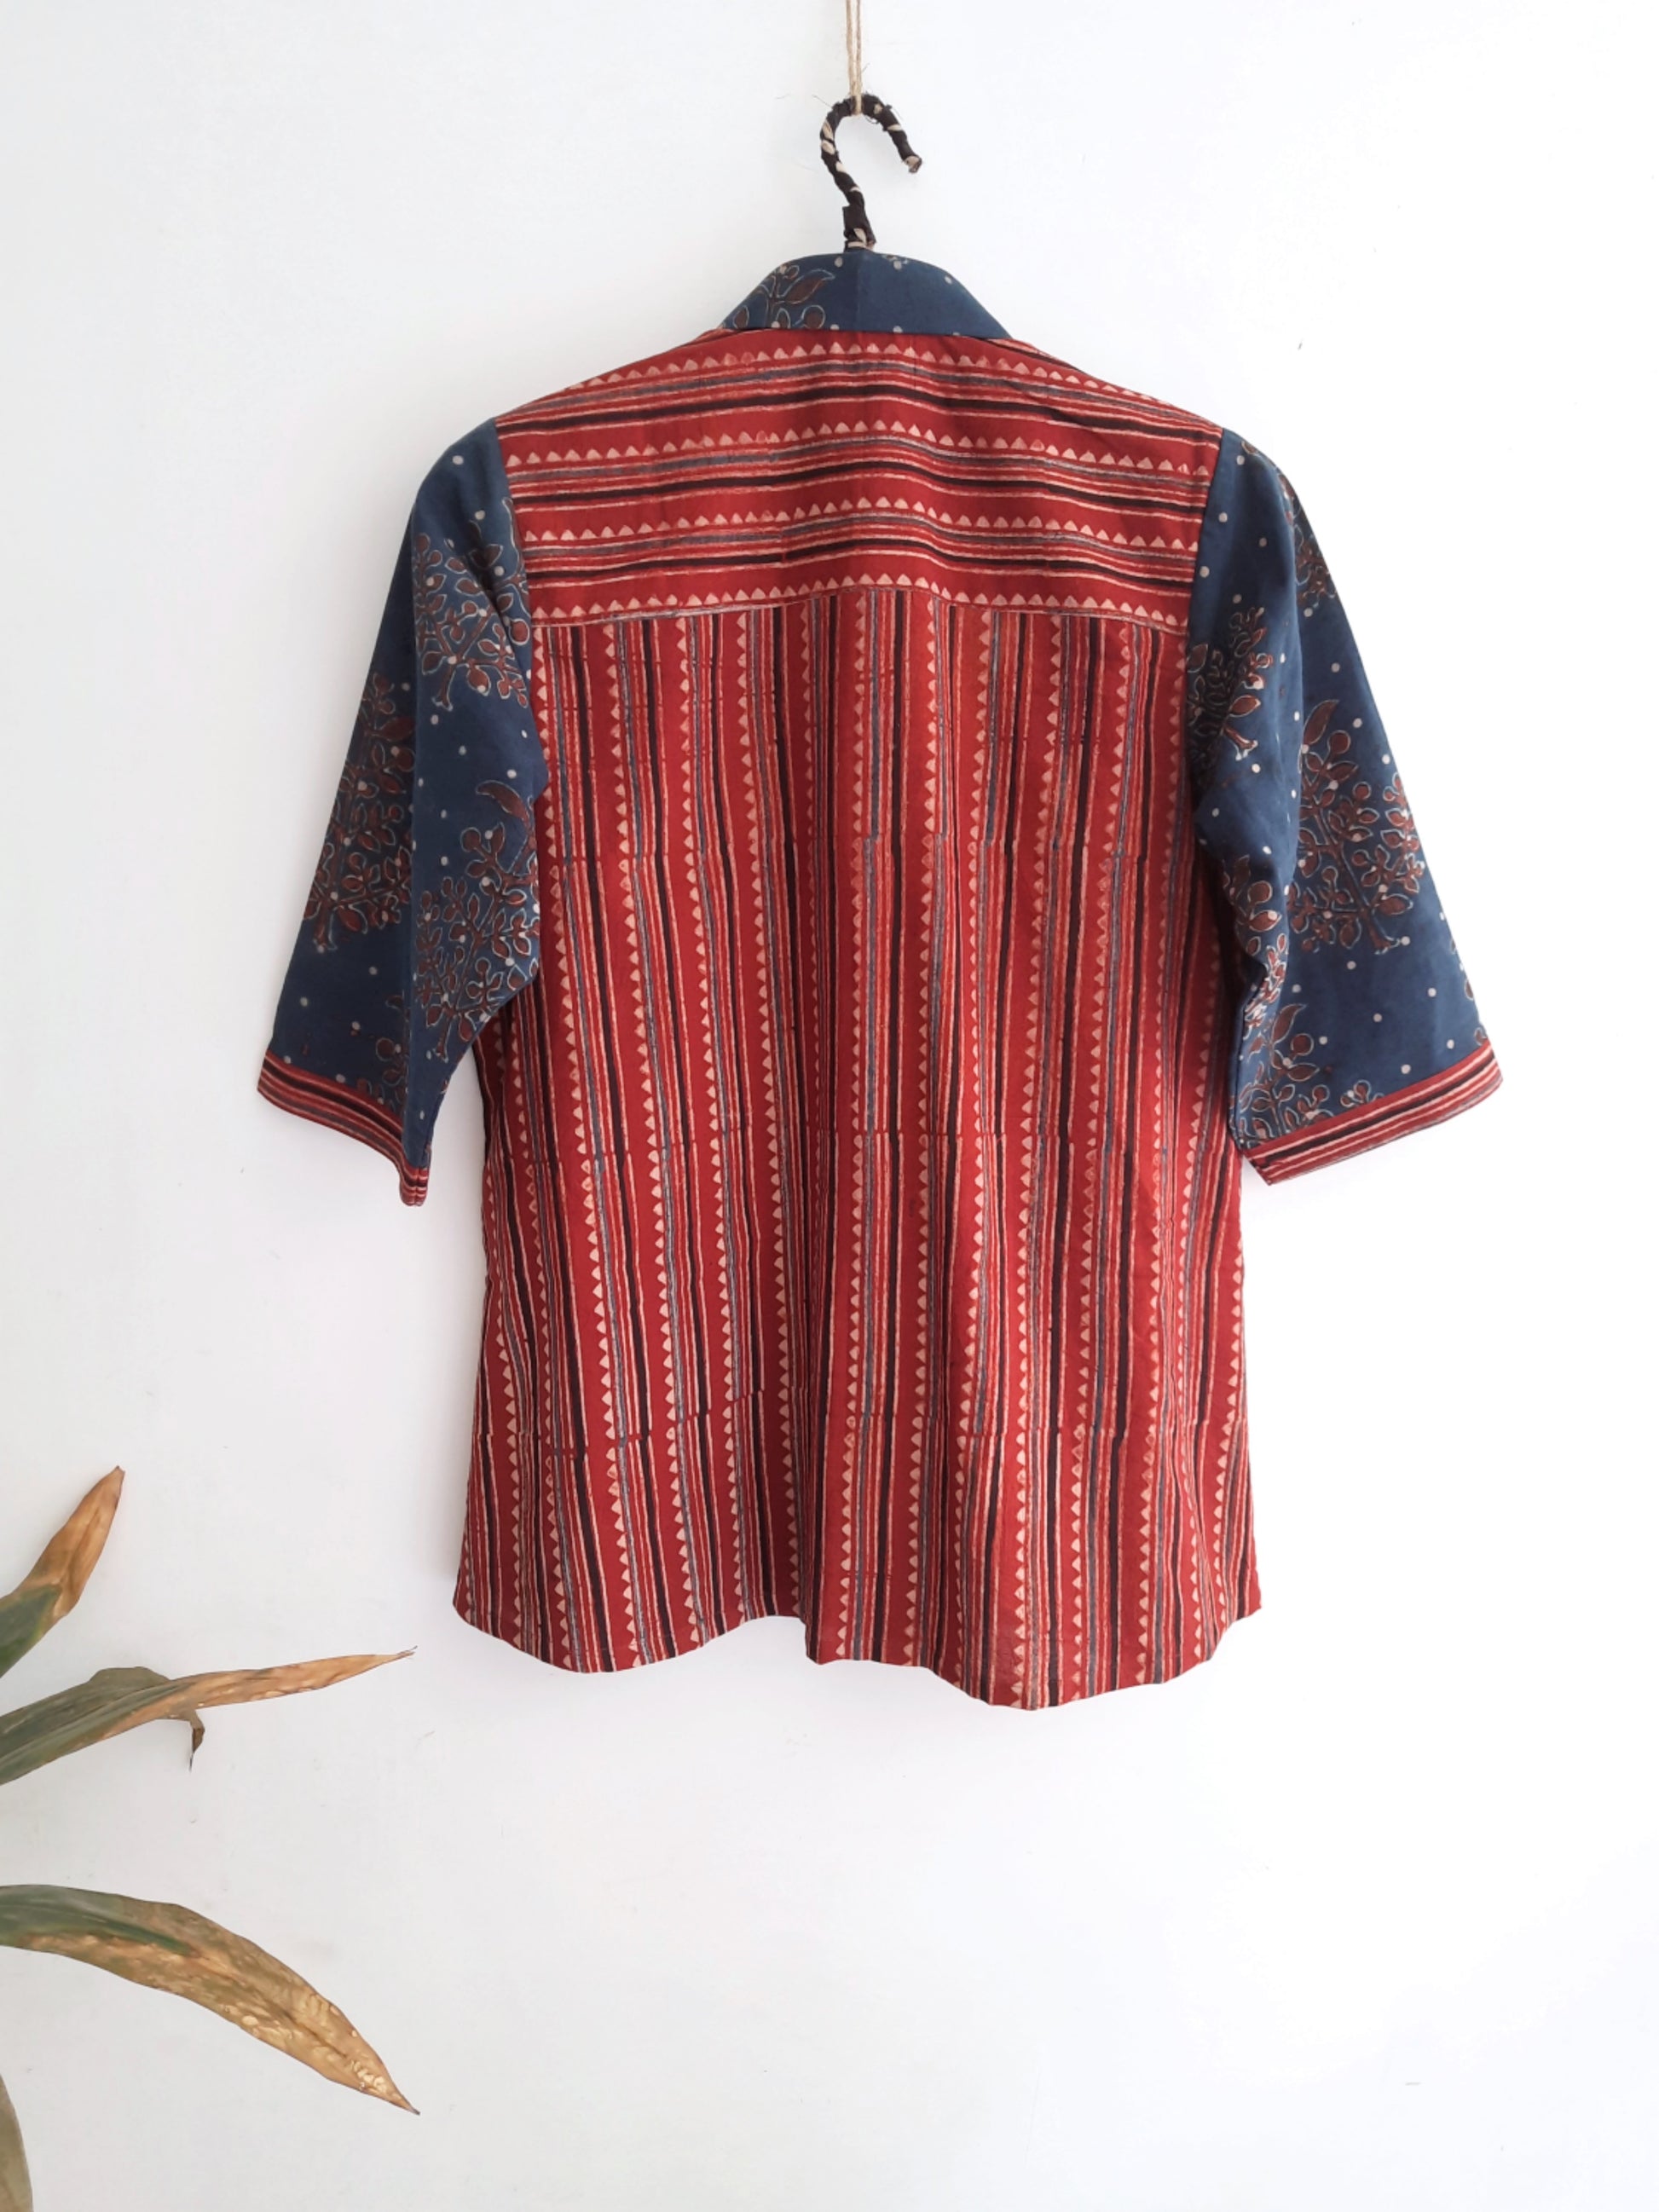 Image: Indigo and madder-dyed Ajrakh hand block print shirt for women, featuring intricate designs perfect for boho and classy summer looks. Breathable fabric ensures comfort for any outing. Shop now at Turquoisethestore.